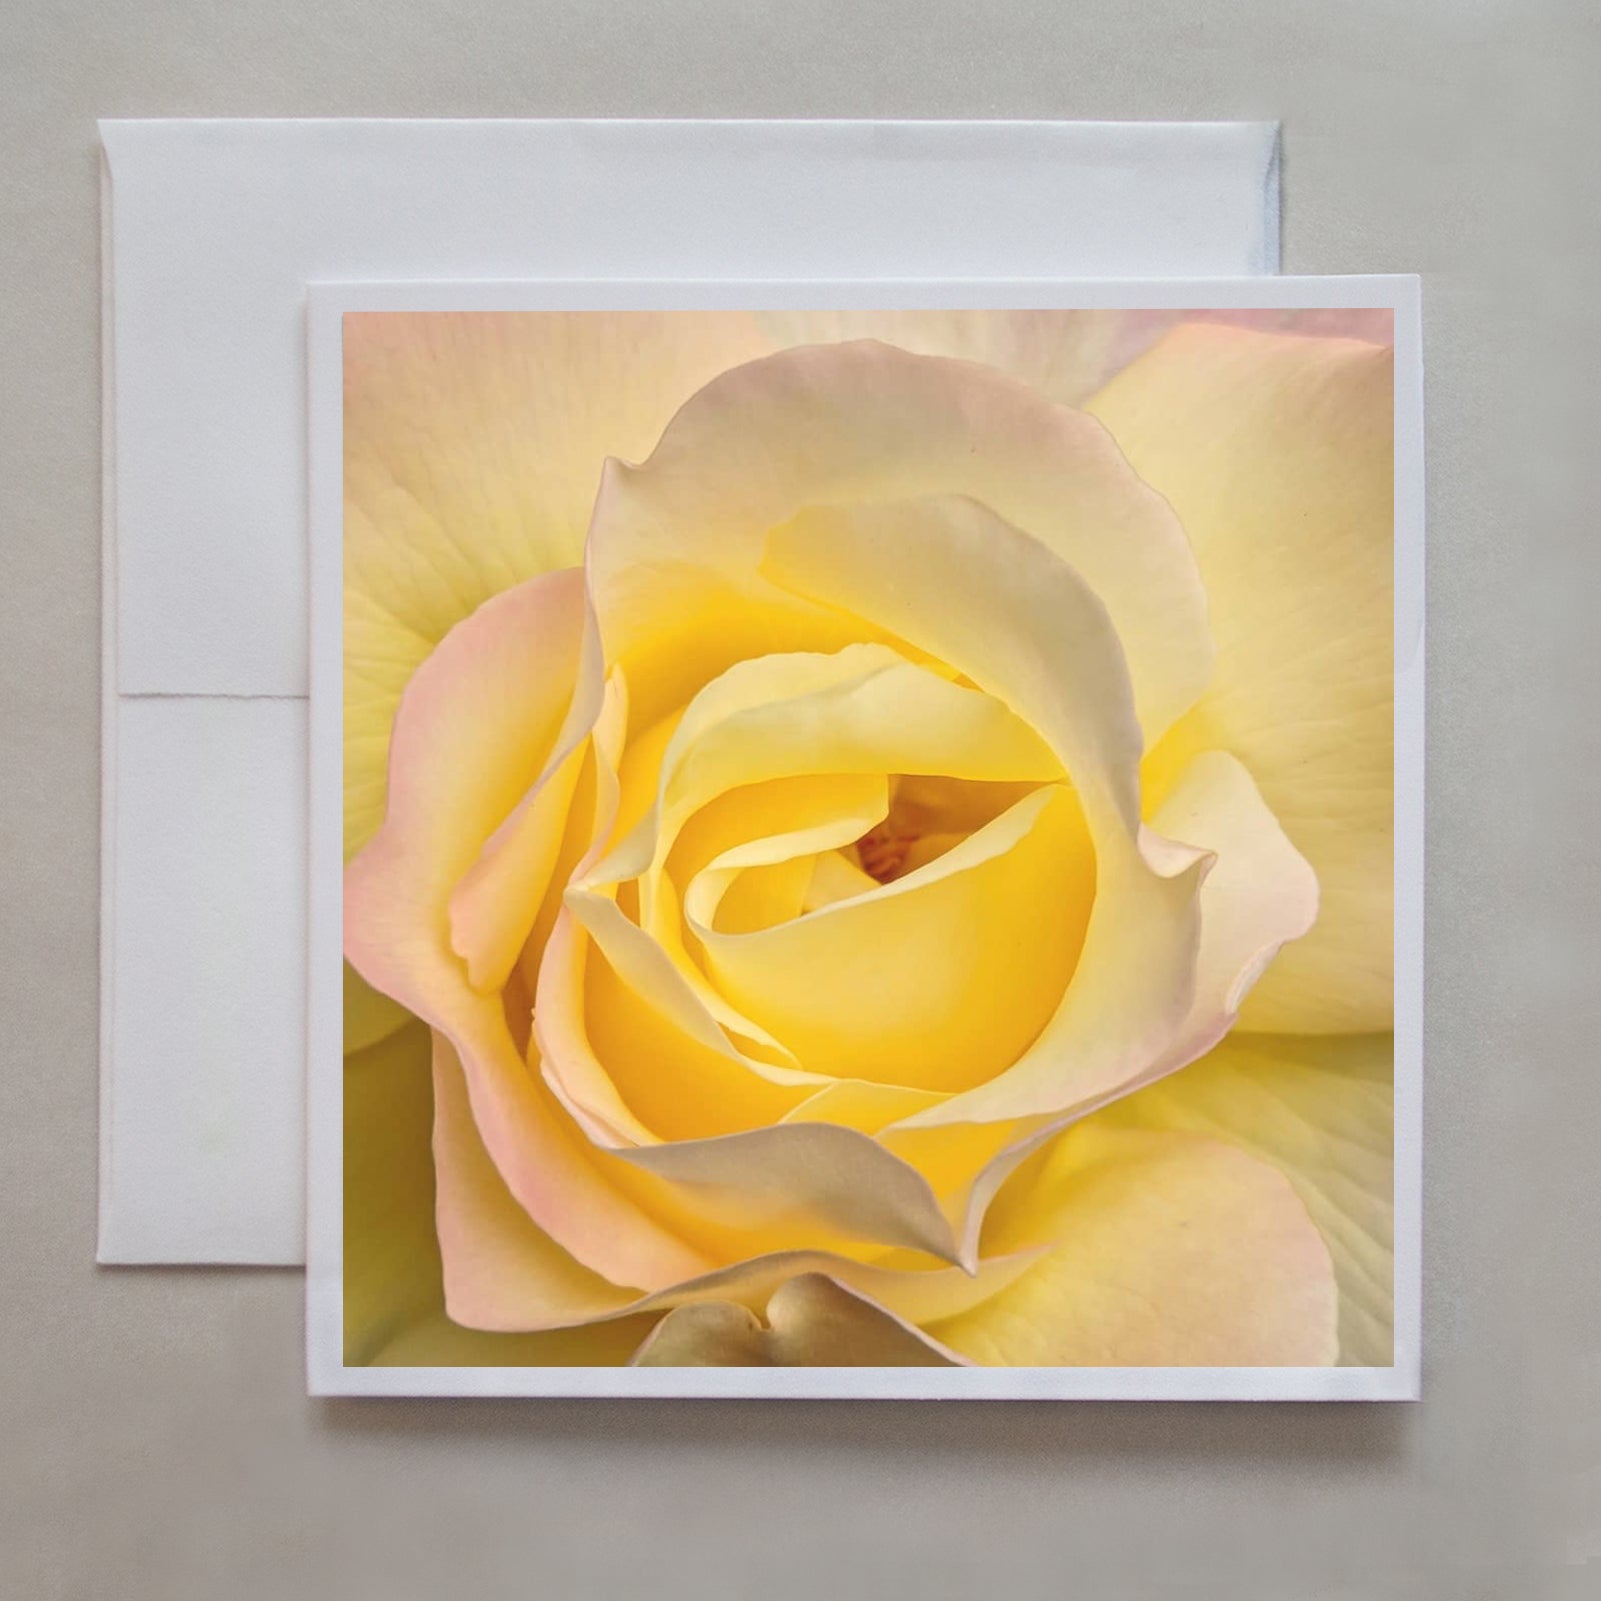 Gorgeous details of the centre of a delicate yellow rose are shown in this notecard by photographer Jennifer Echols. 